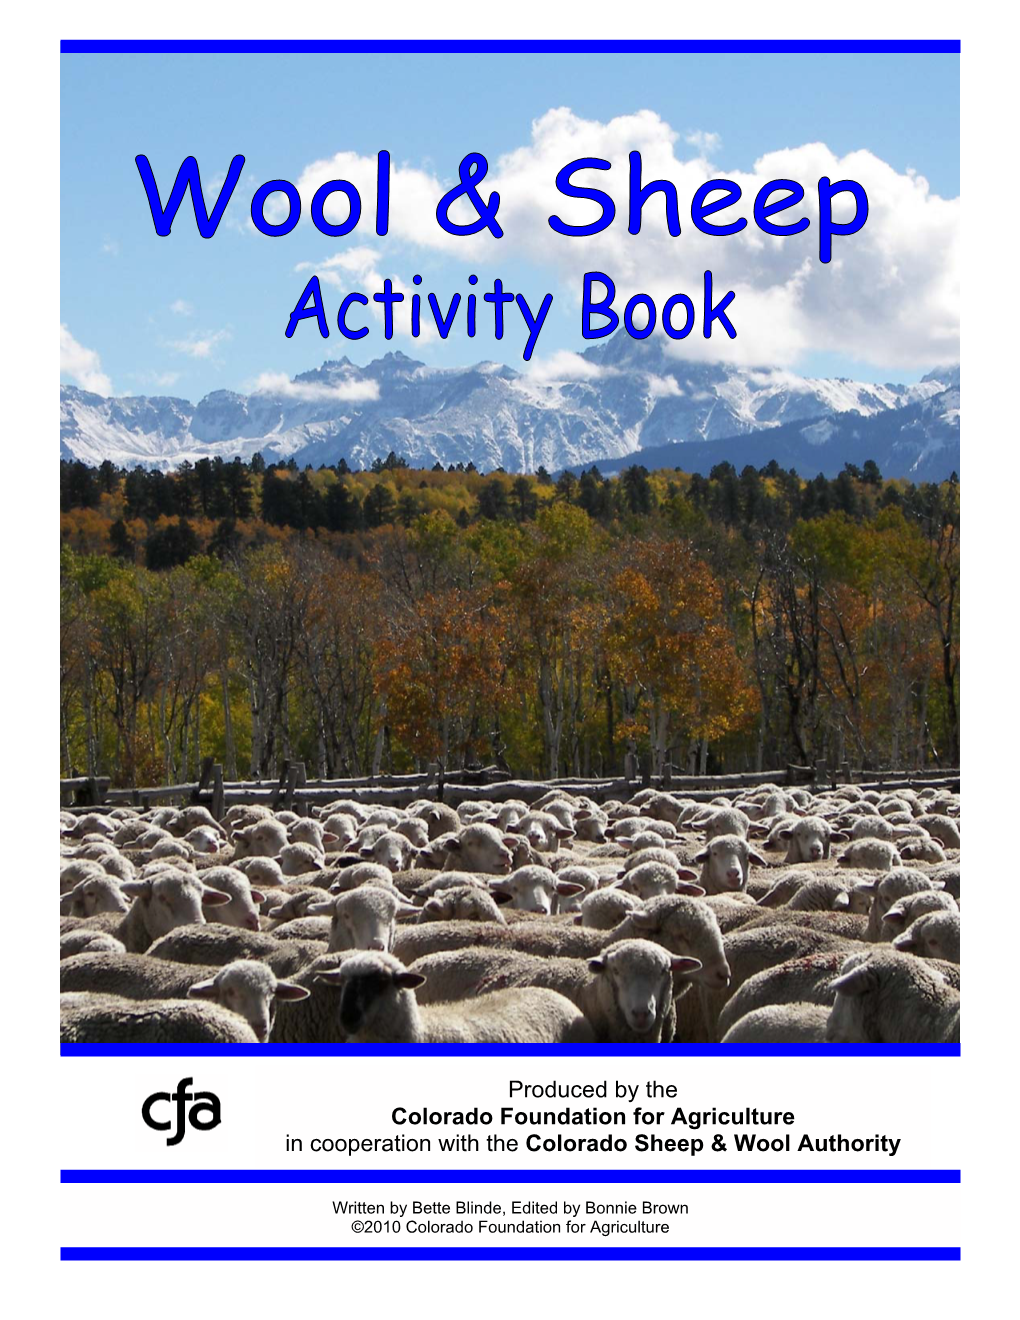 Produced by the Colorado Foundation for Agriculture in Cooperation with the Colorado Sheep & Wool Authority